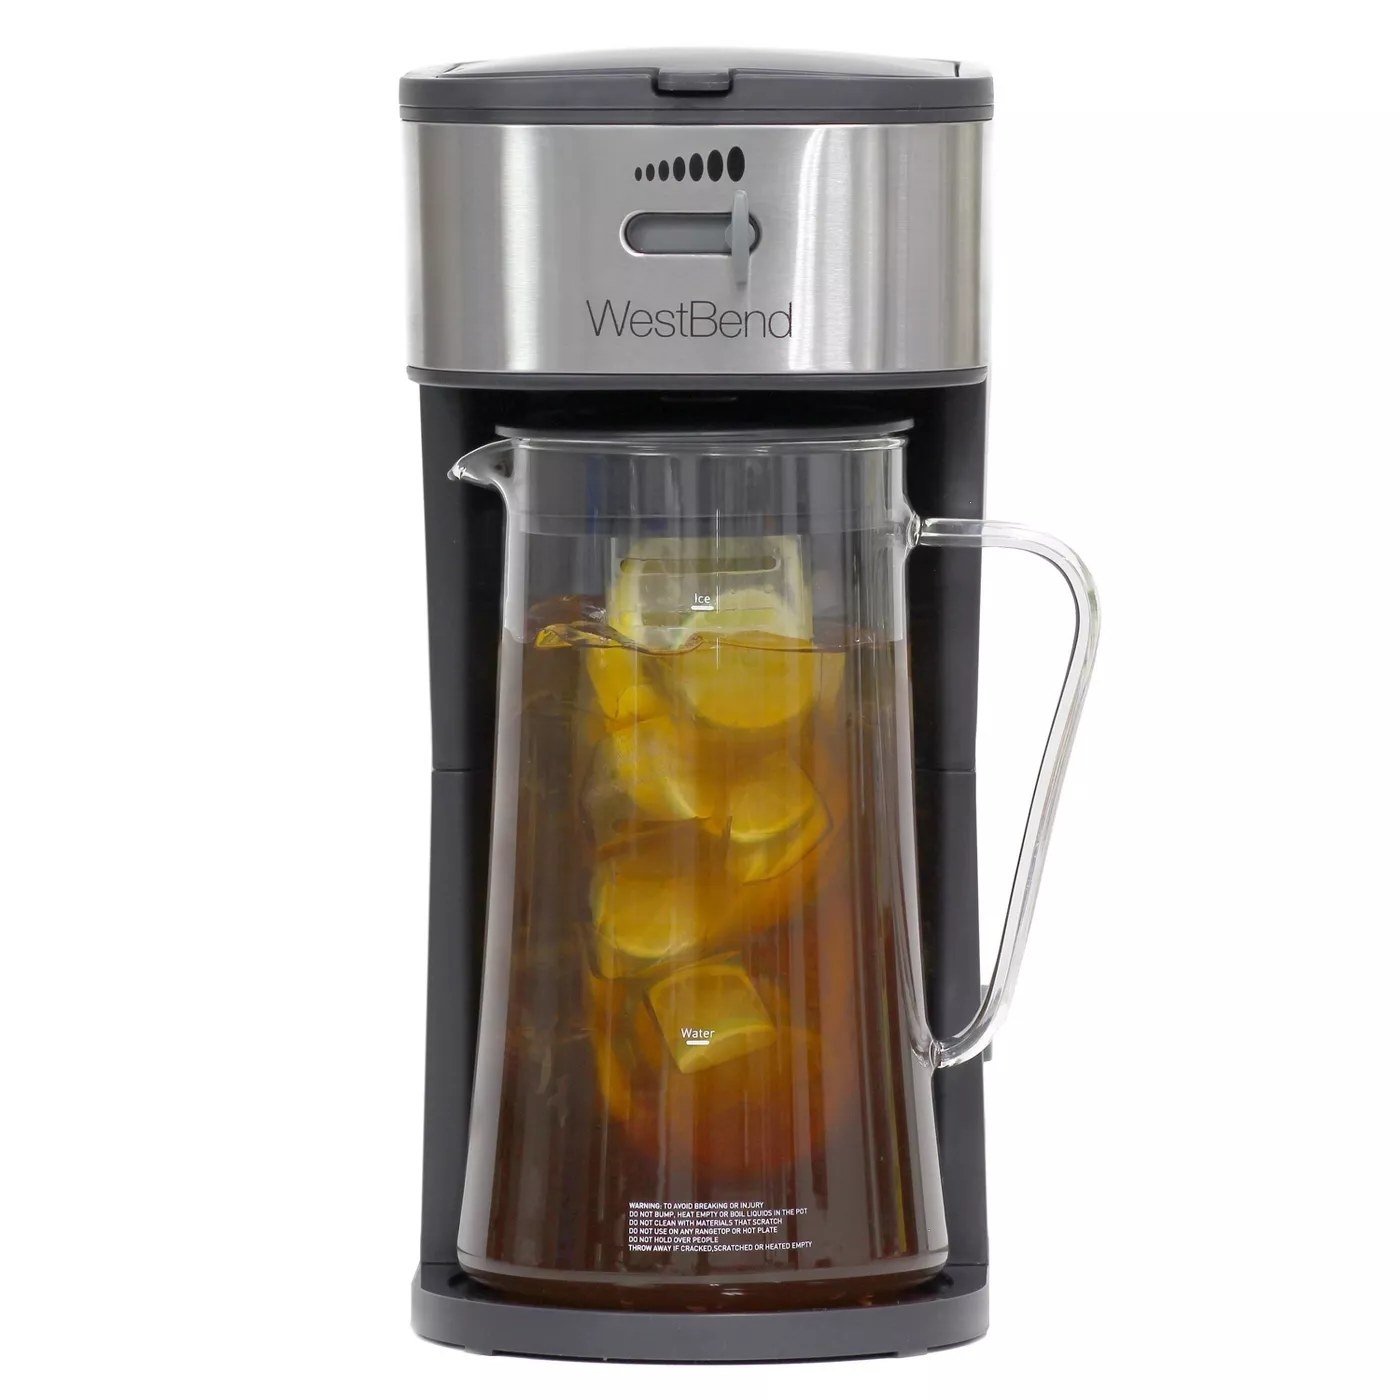 The WestBend iced tea and coffee maker